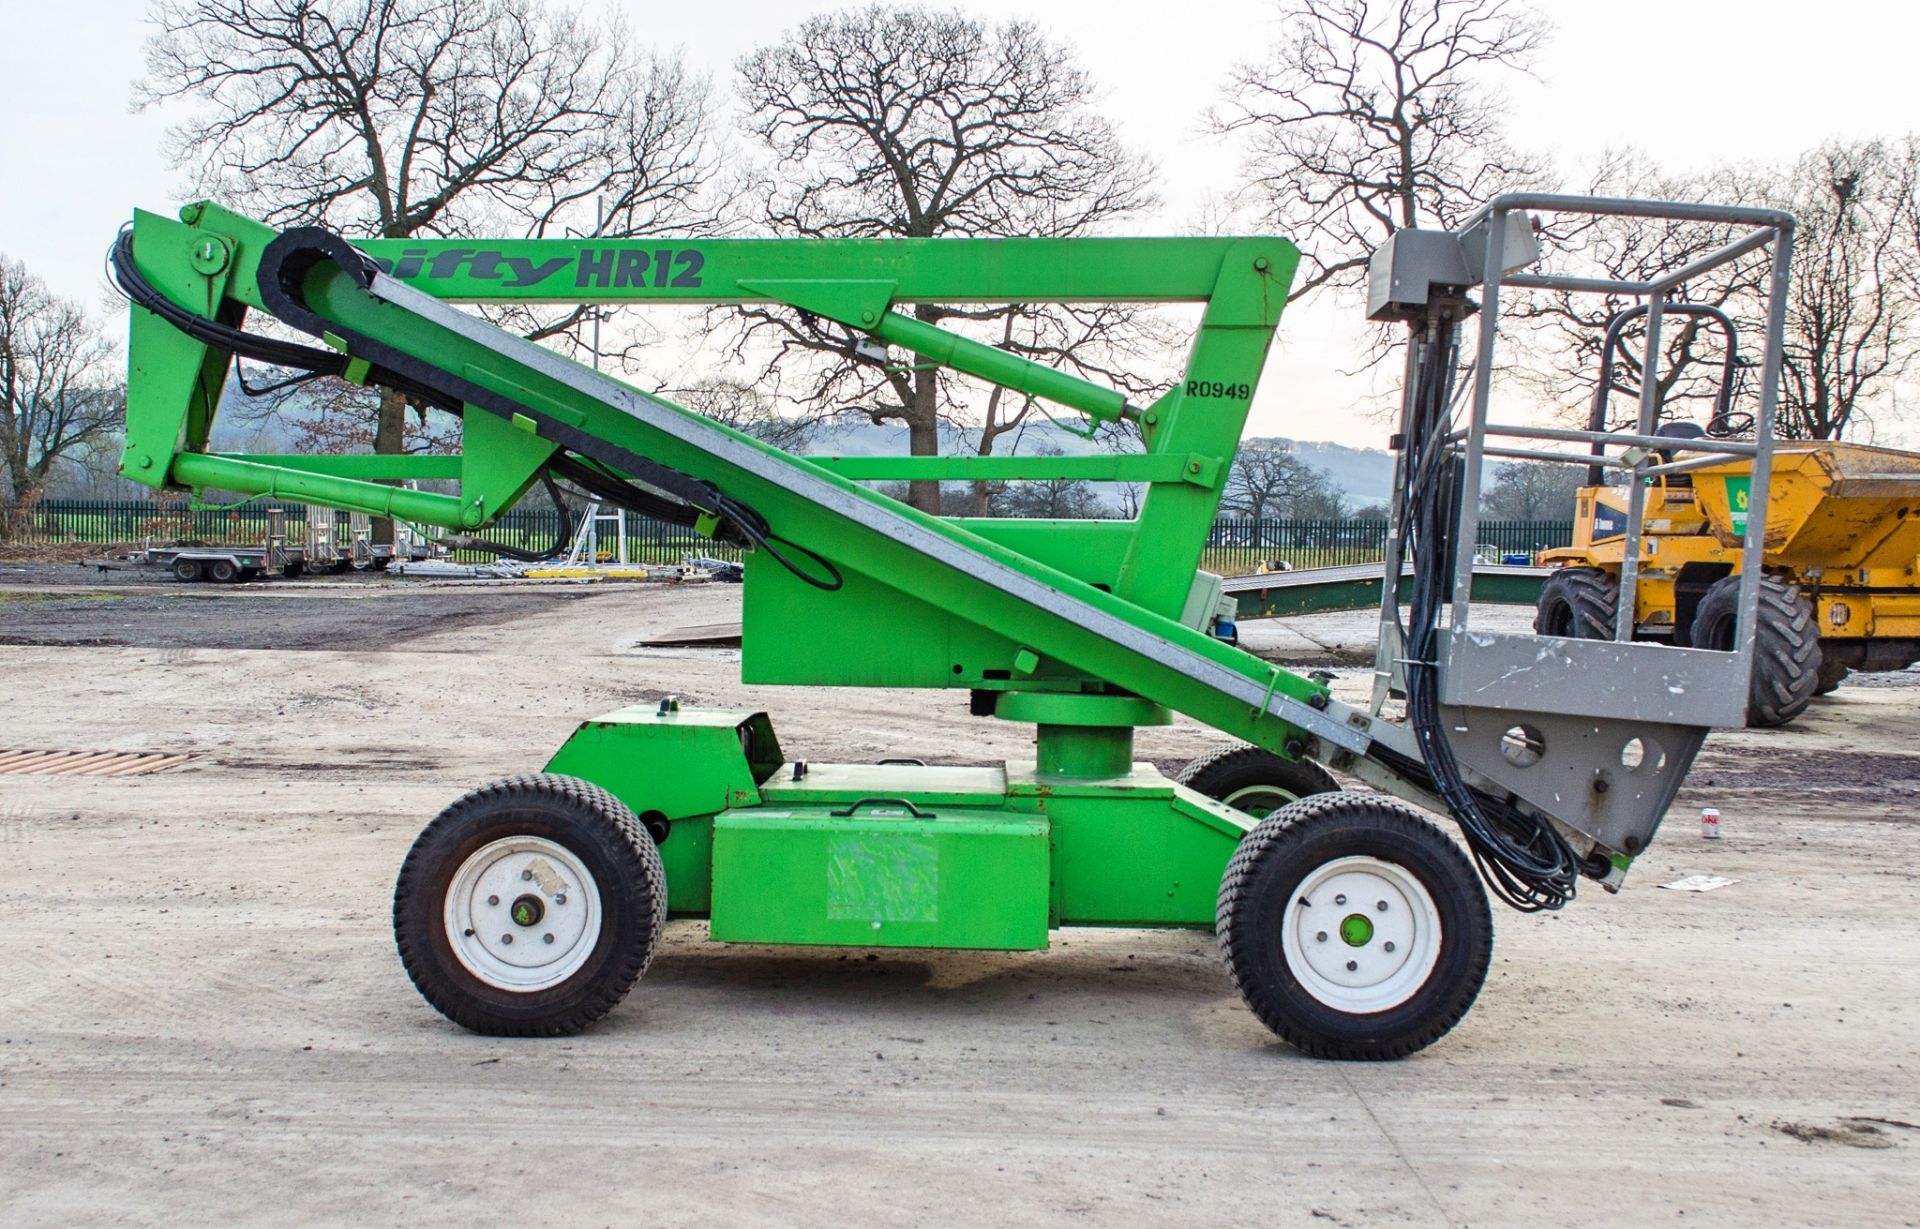 Nifty HR12 Heightrider battery electric/diesel articulated boom lift access platform Year: 2003 S/N: - Image 7 of 18